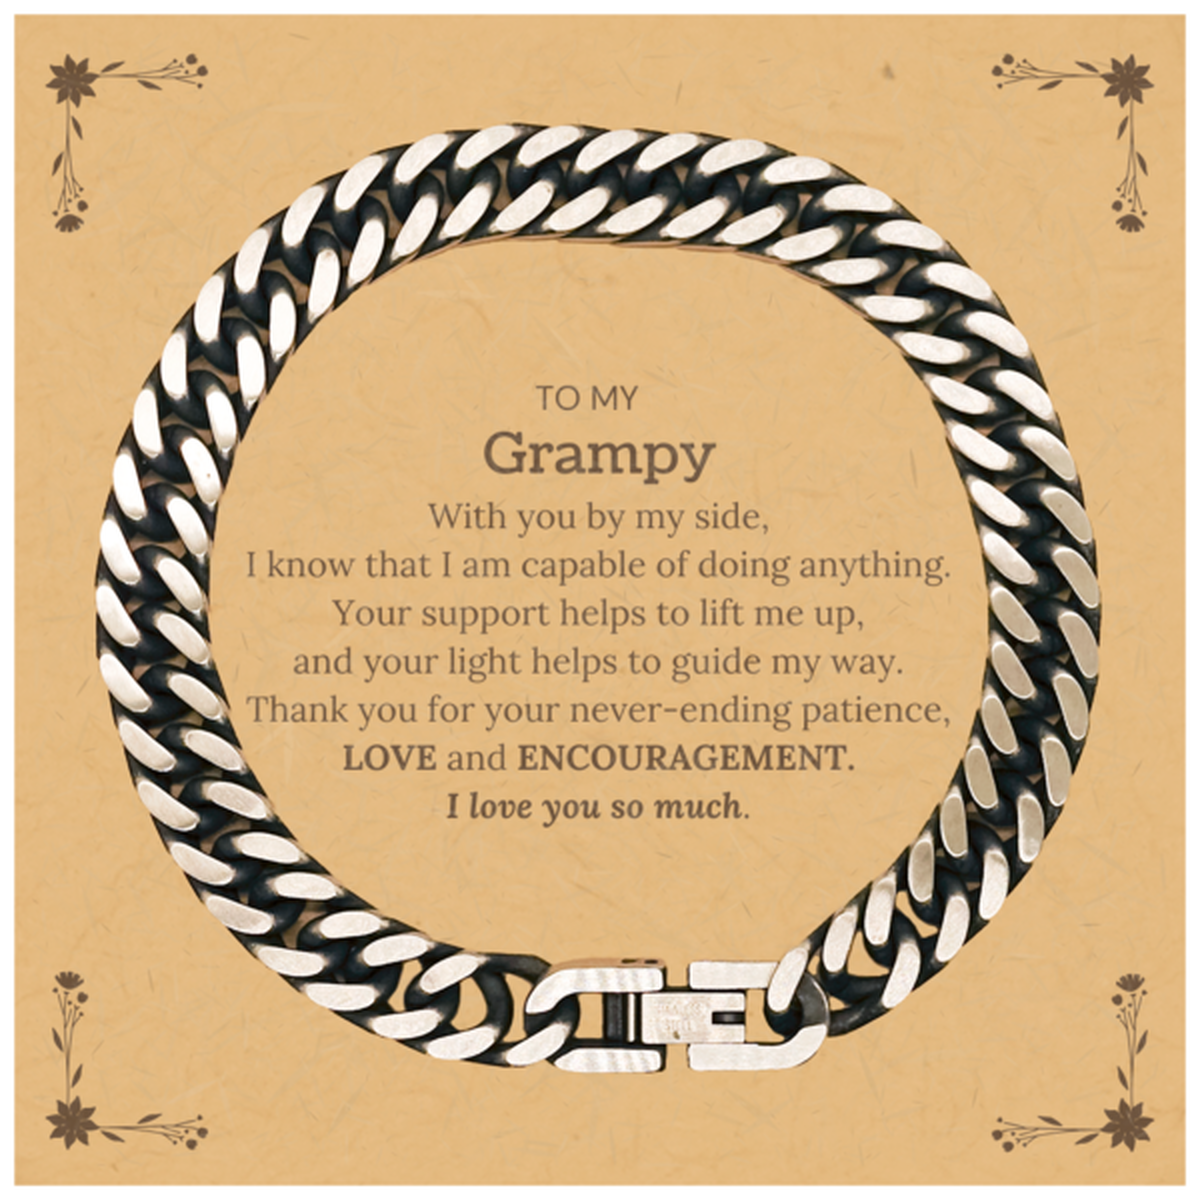 Appreciation Grampy Cuban Link Chain Bracelet Gifts, To My Grampy Birthday Christmas Wedding Keepsake Gifts for Grampy With you by my side, I know that I am capable of doing anything. I love you so much